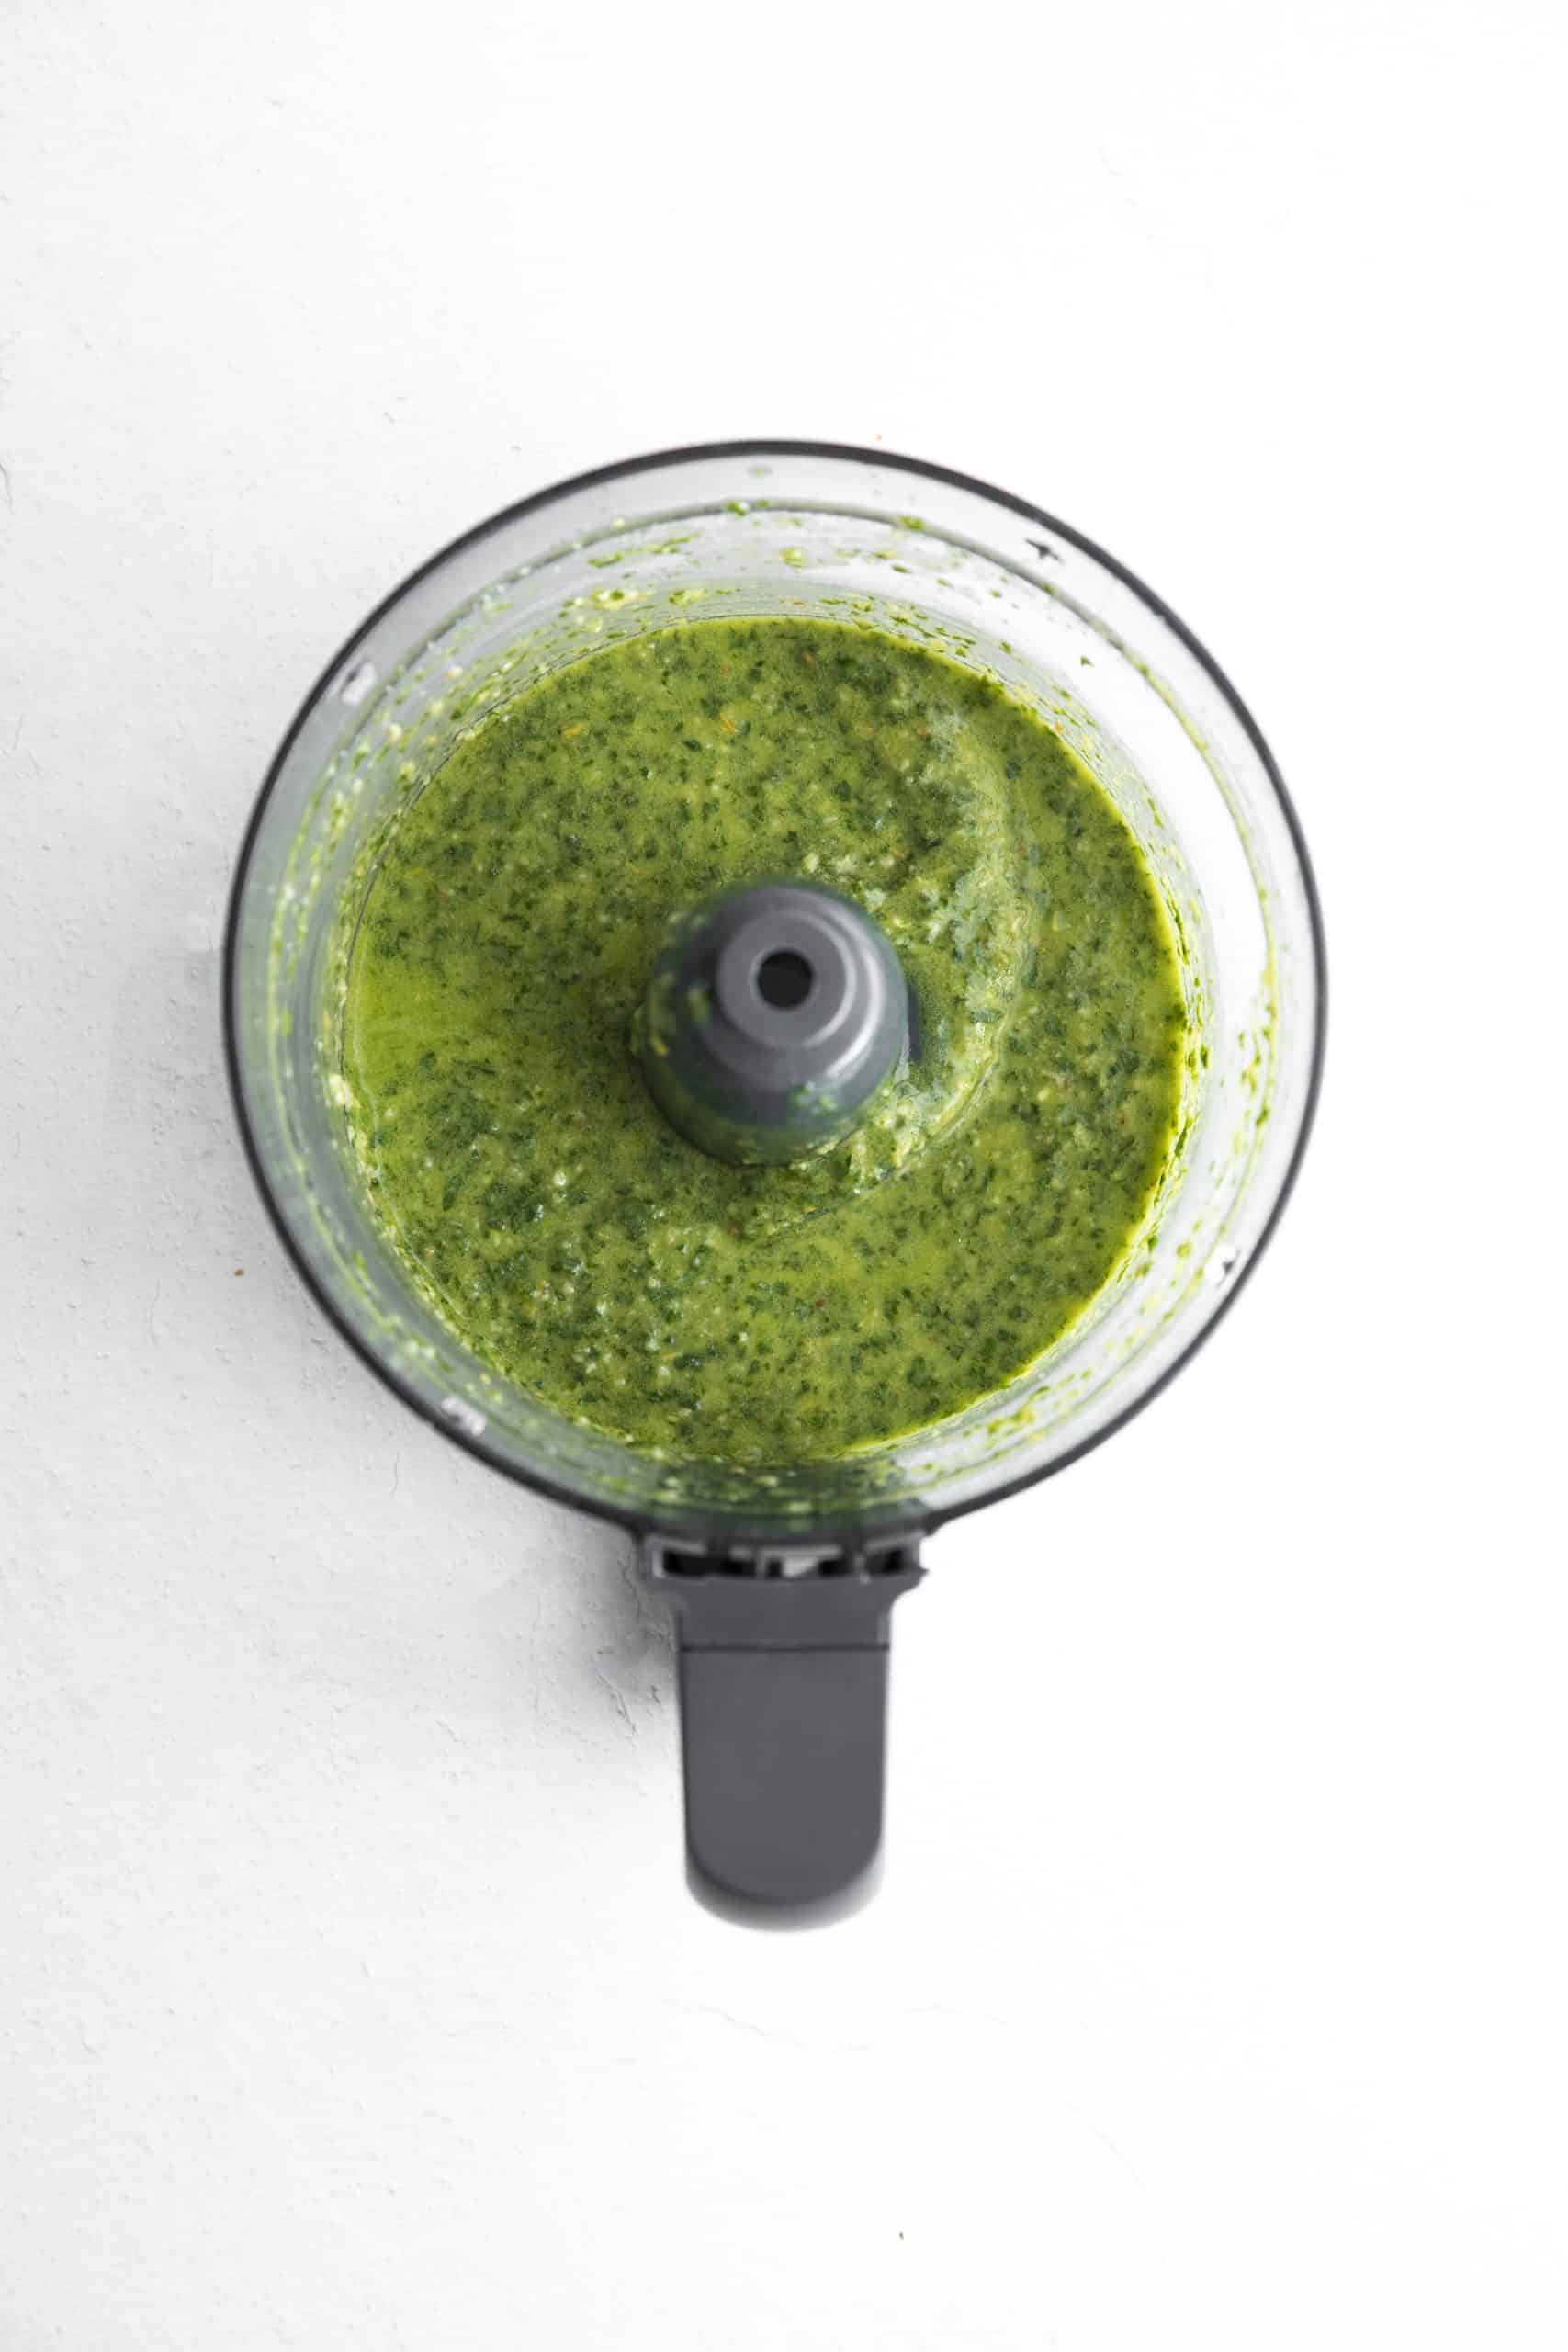 fully blended basil pesto in a food processor.